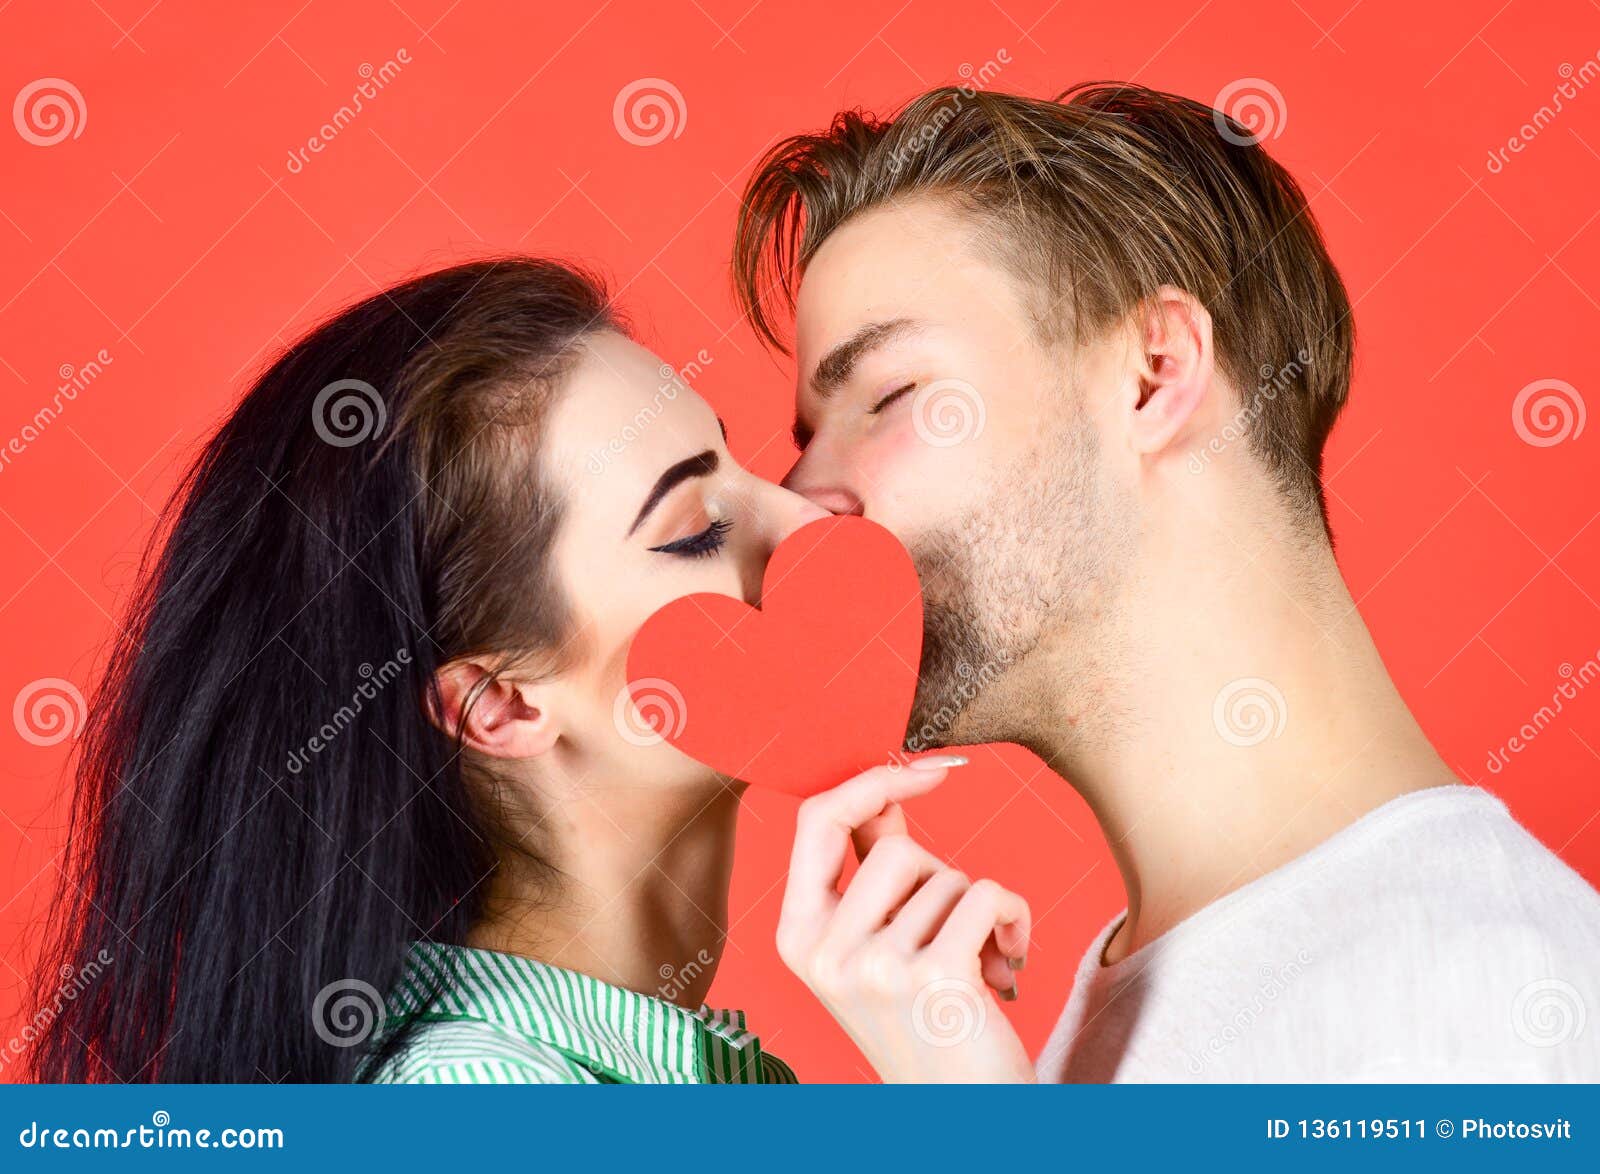 Love and Foreplay. Romantic Kiss Concept. Couple in Love Kissing ...